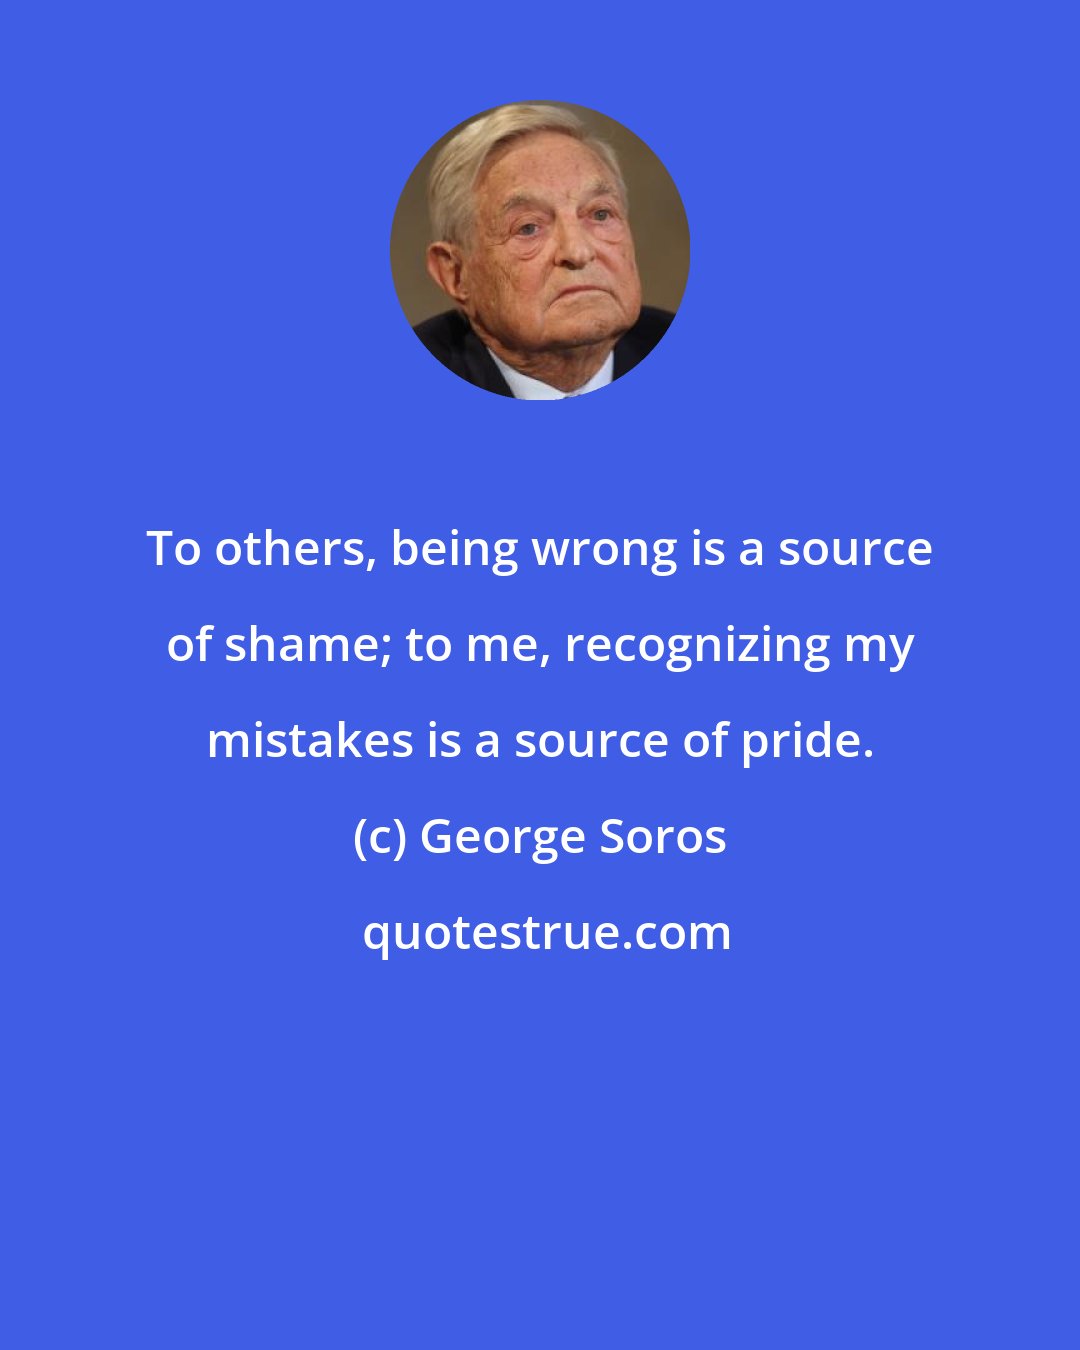 George Soros: To others, being wrong is a source of shame; to me, recognizing my mistakes is a source of pride.